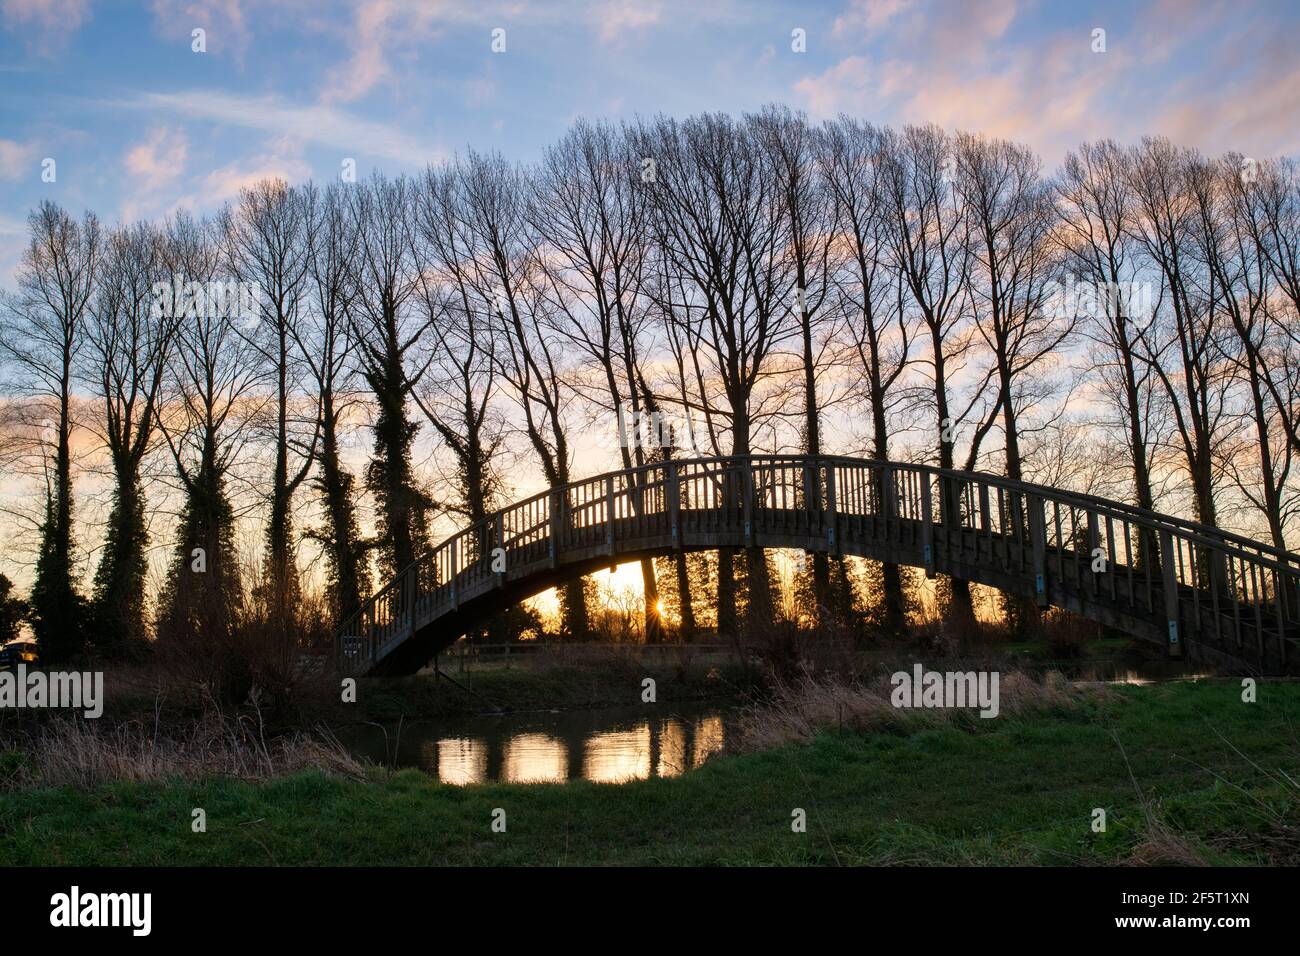 Bloomers Hole Footbridge. Wooden bridge across the river thames near buscot at sunrise in early spring. Buscot, Oxfordshire, England Stock Photo